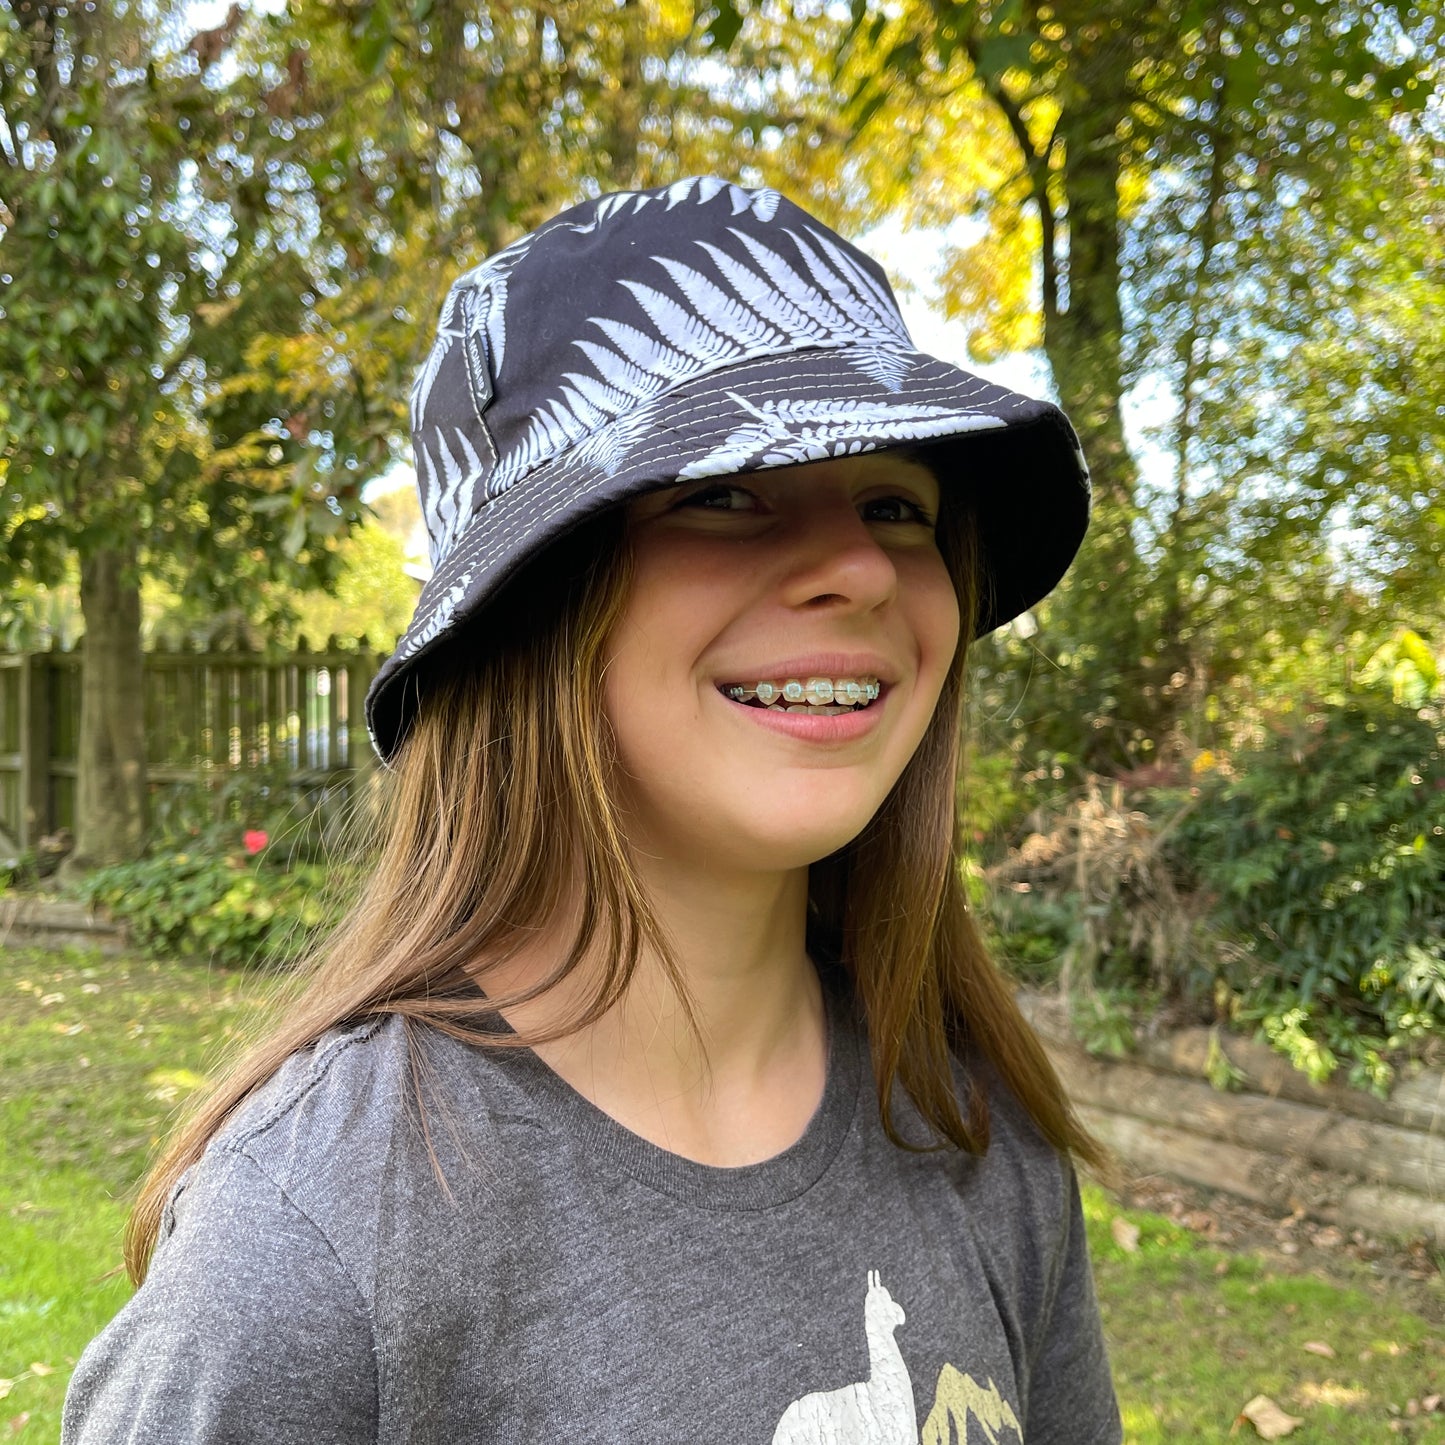 Young girl with long brown hair head wearing a bucket hat in black with white ferns printed on it.